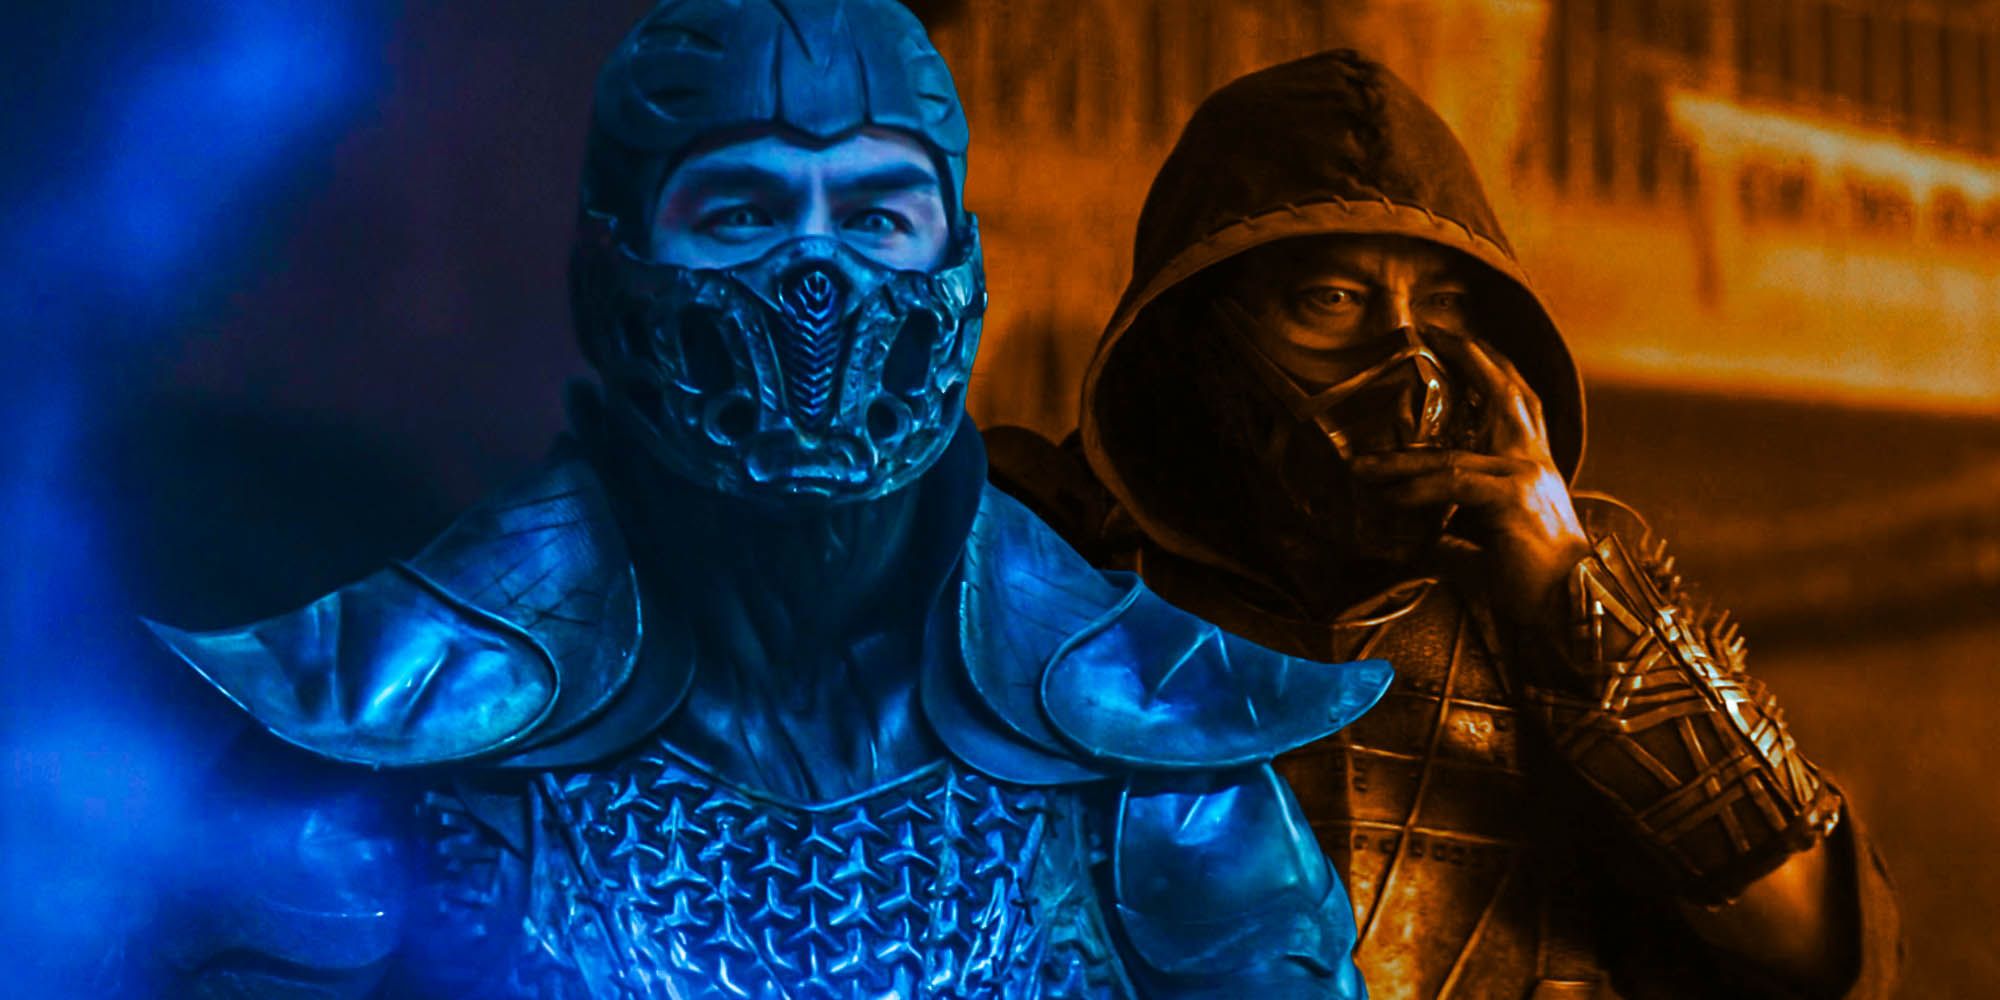 Mr. Krypt 💀🐉 on X: Scorpion and Sub Zero looked so badass in